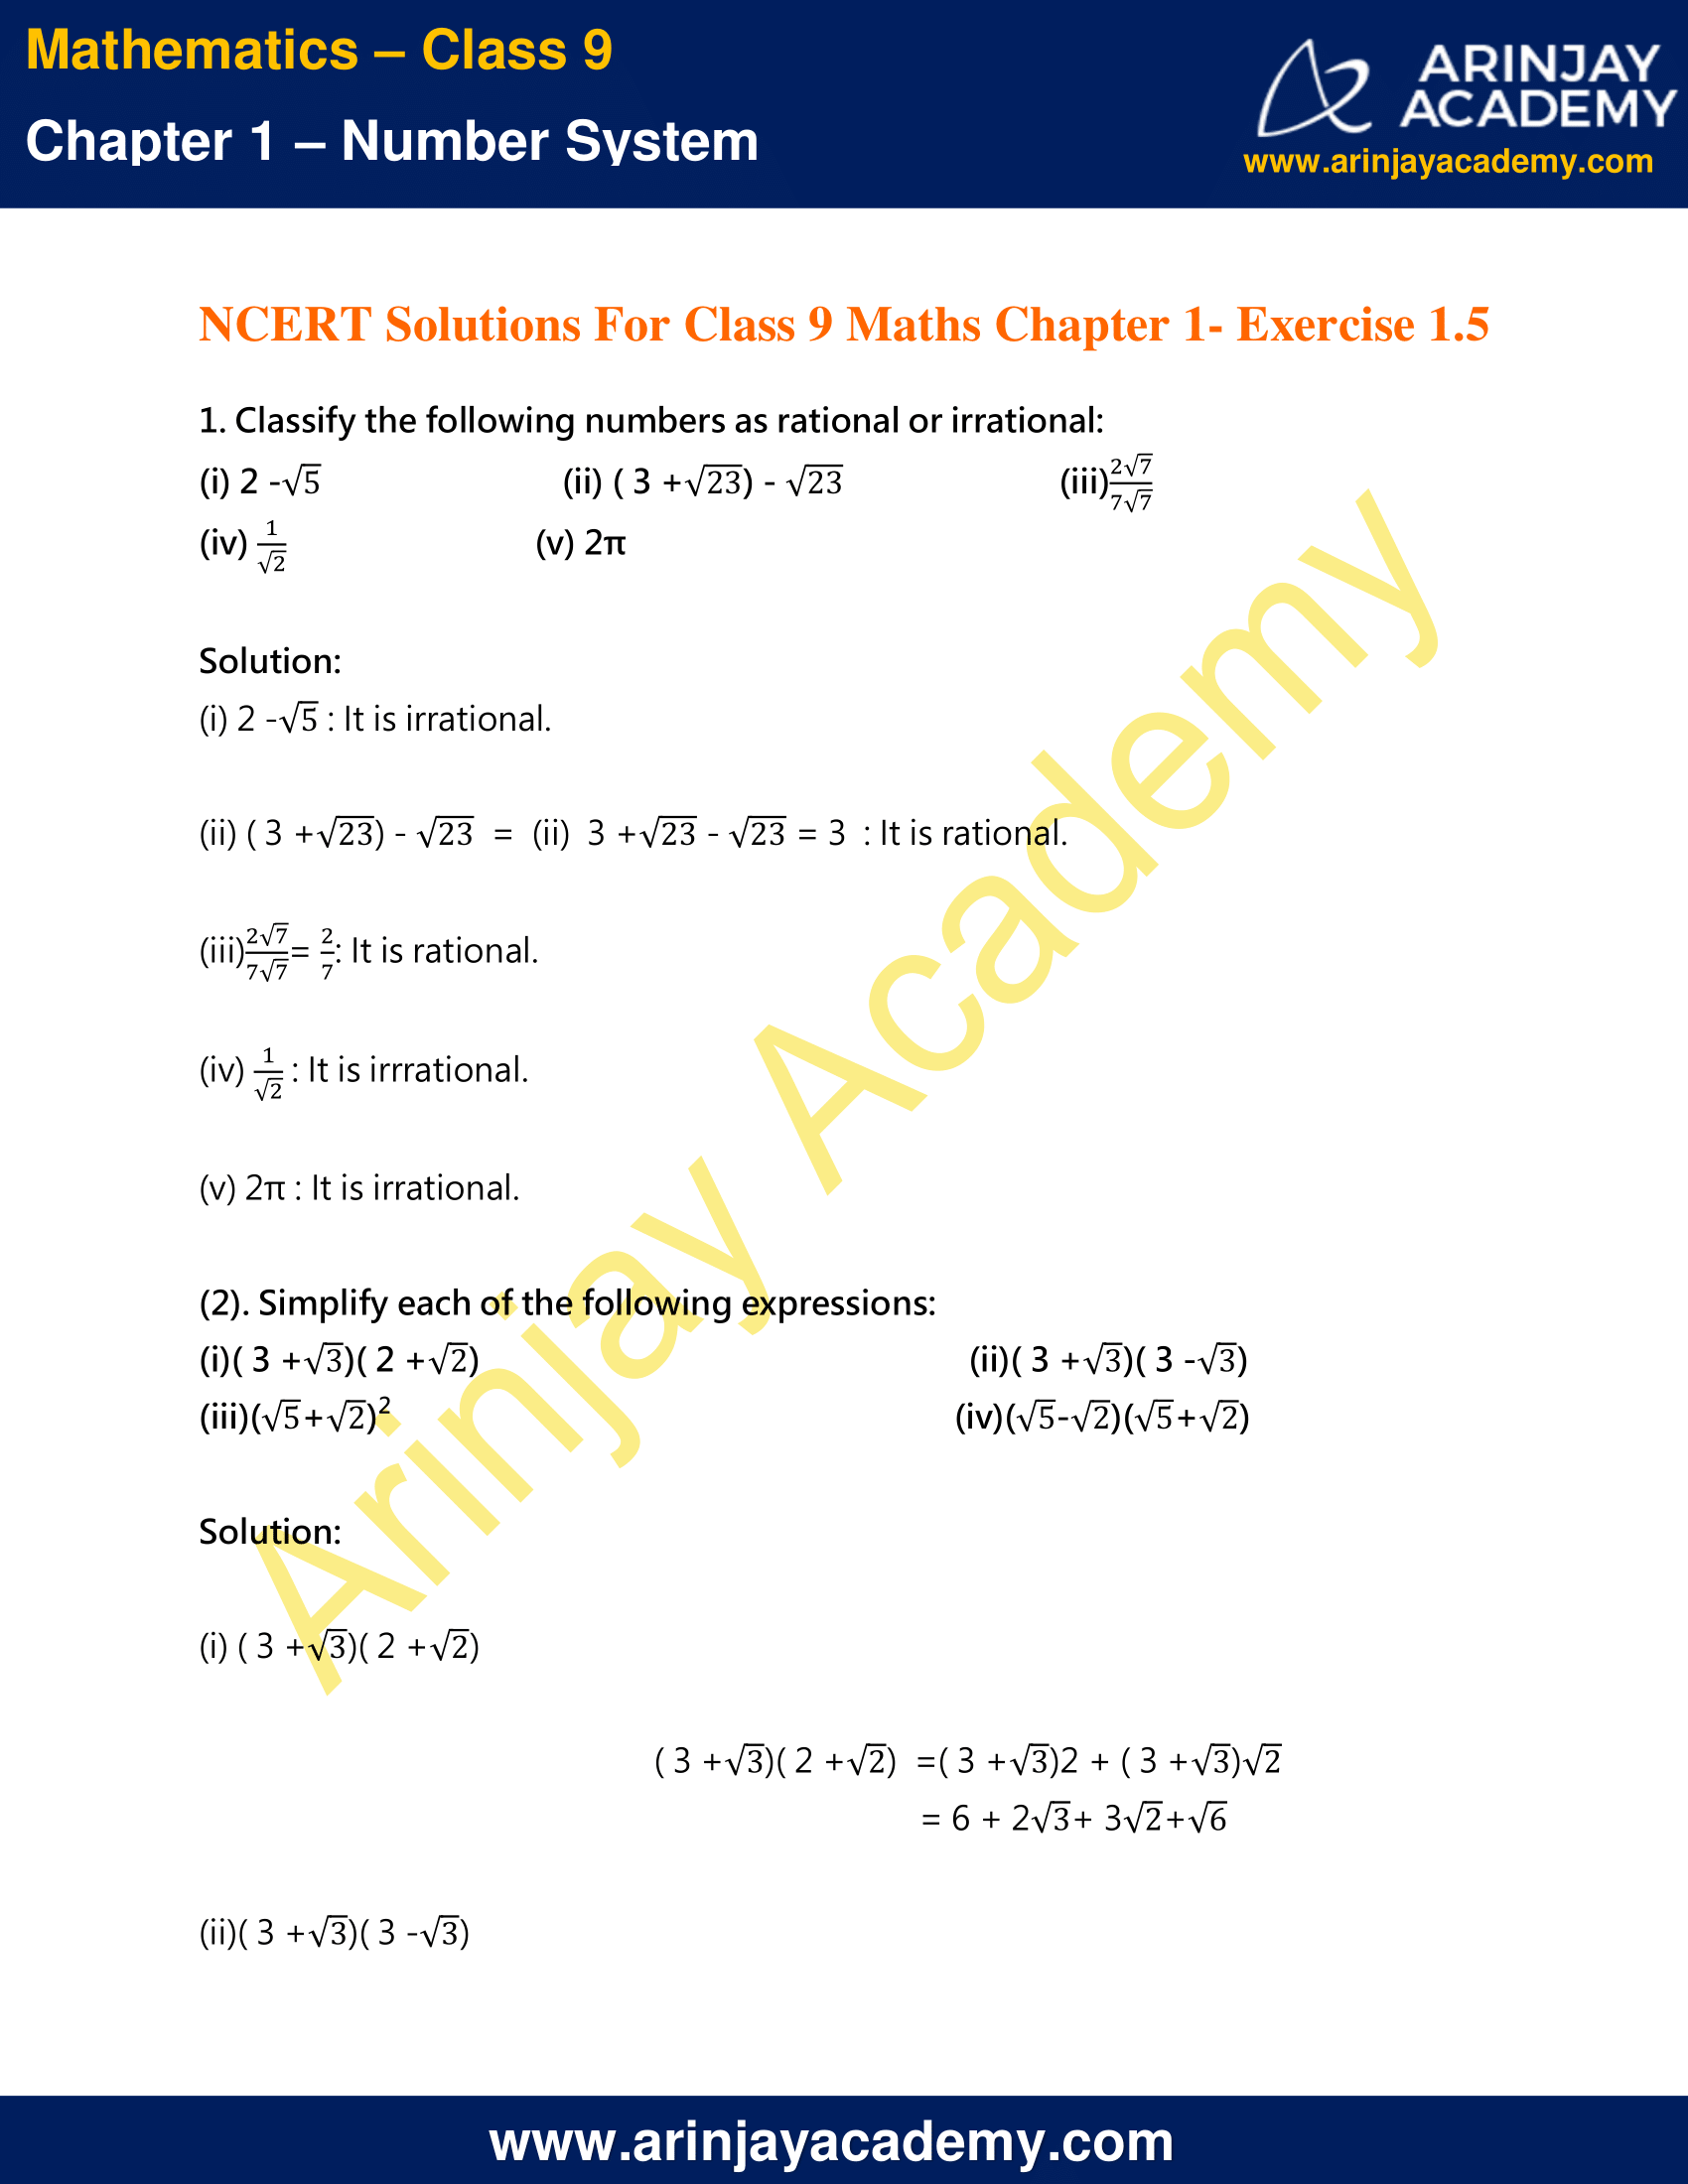 NCERT Solutions For Class 9 Maths Chapter 1 Exercise 1.5 image 1